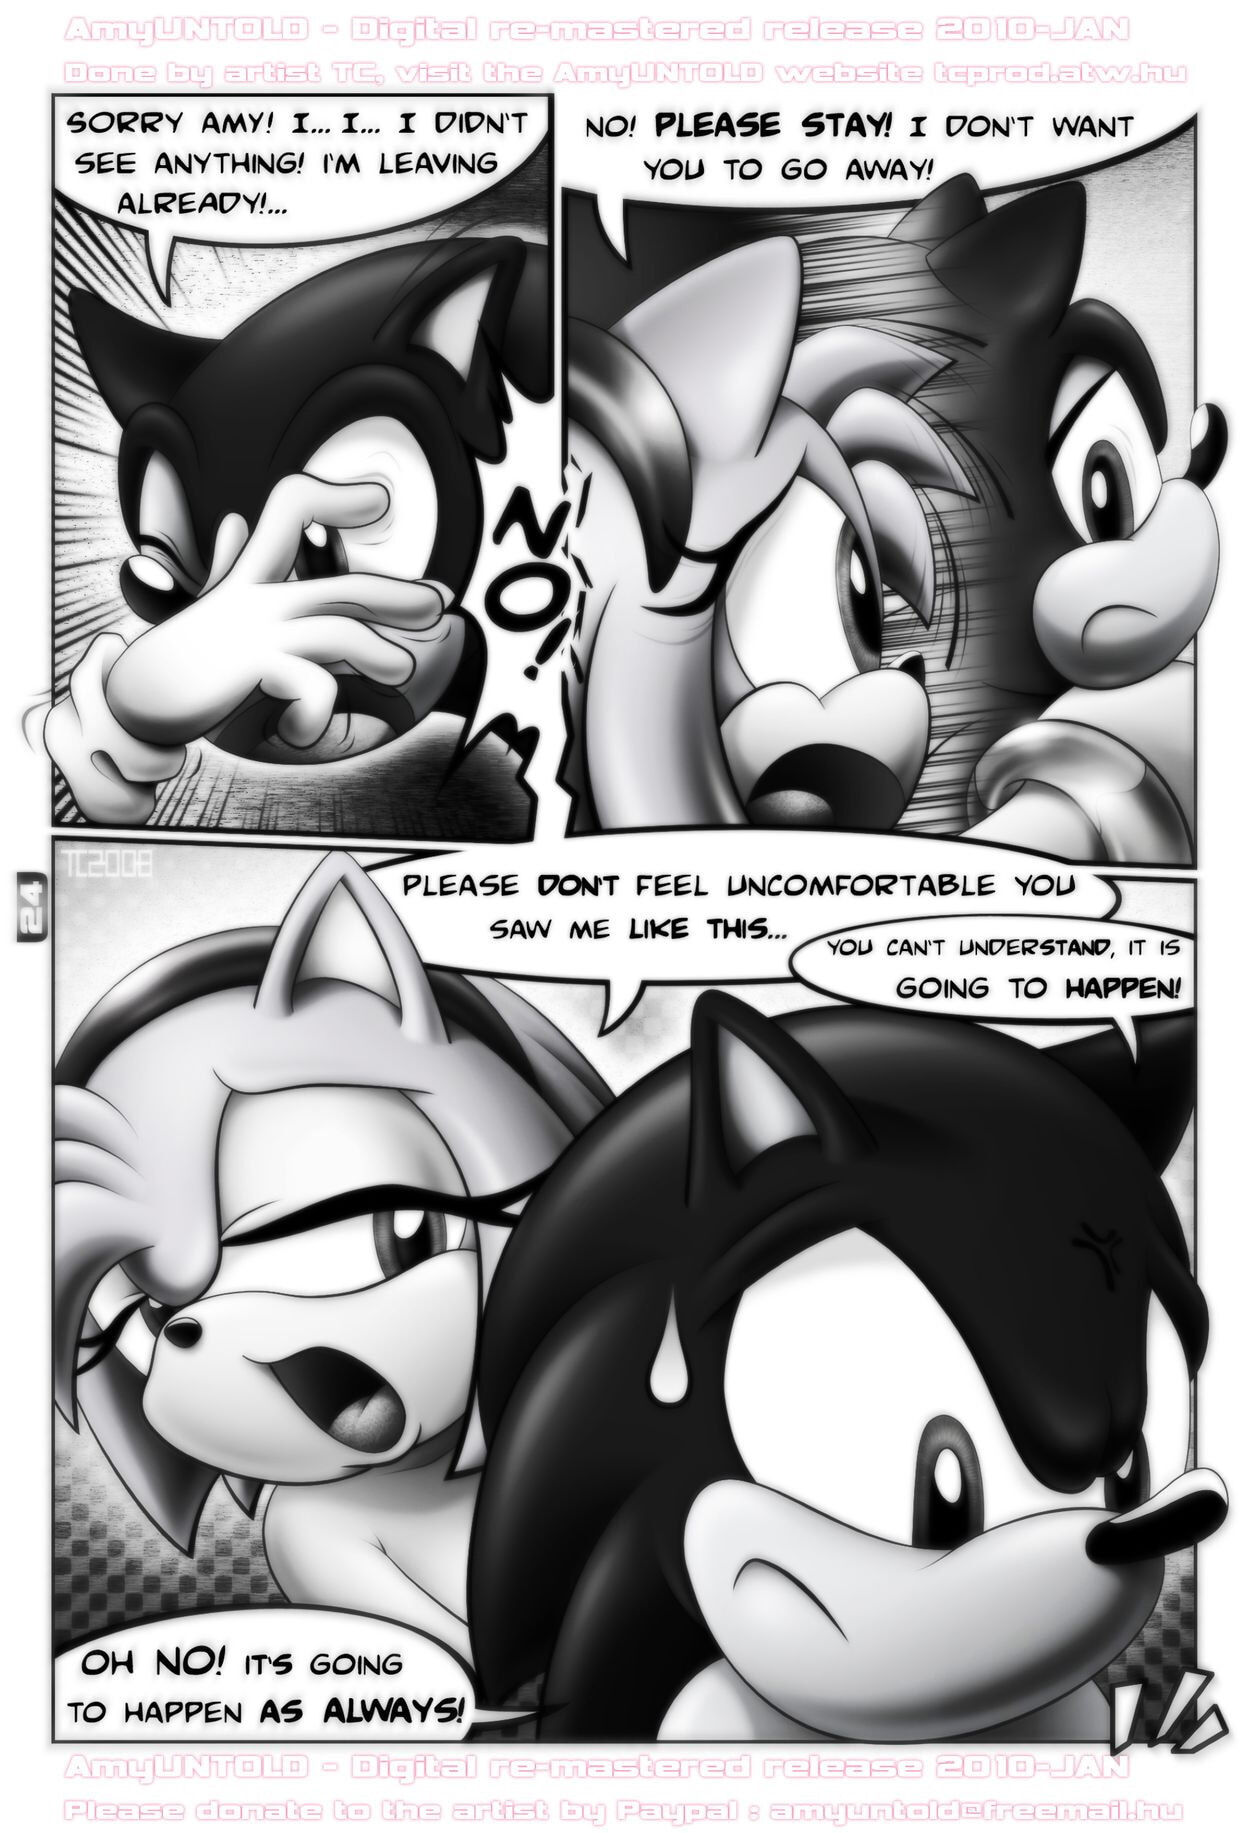 Amy Untold - Finally - Page 24